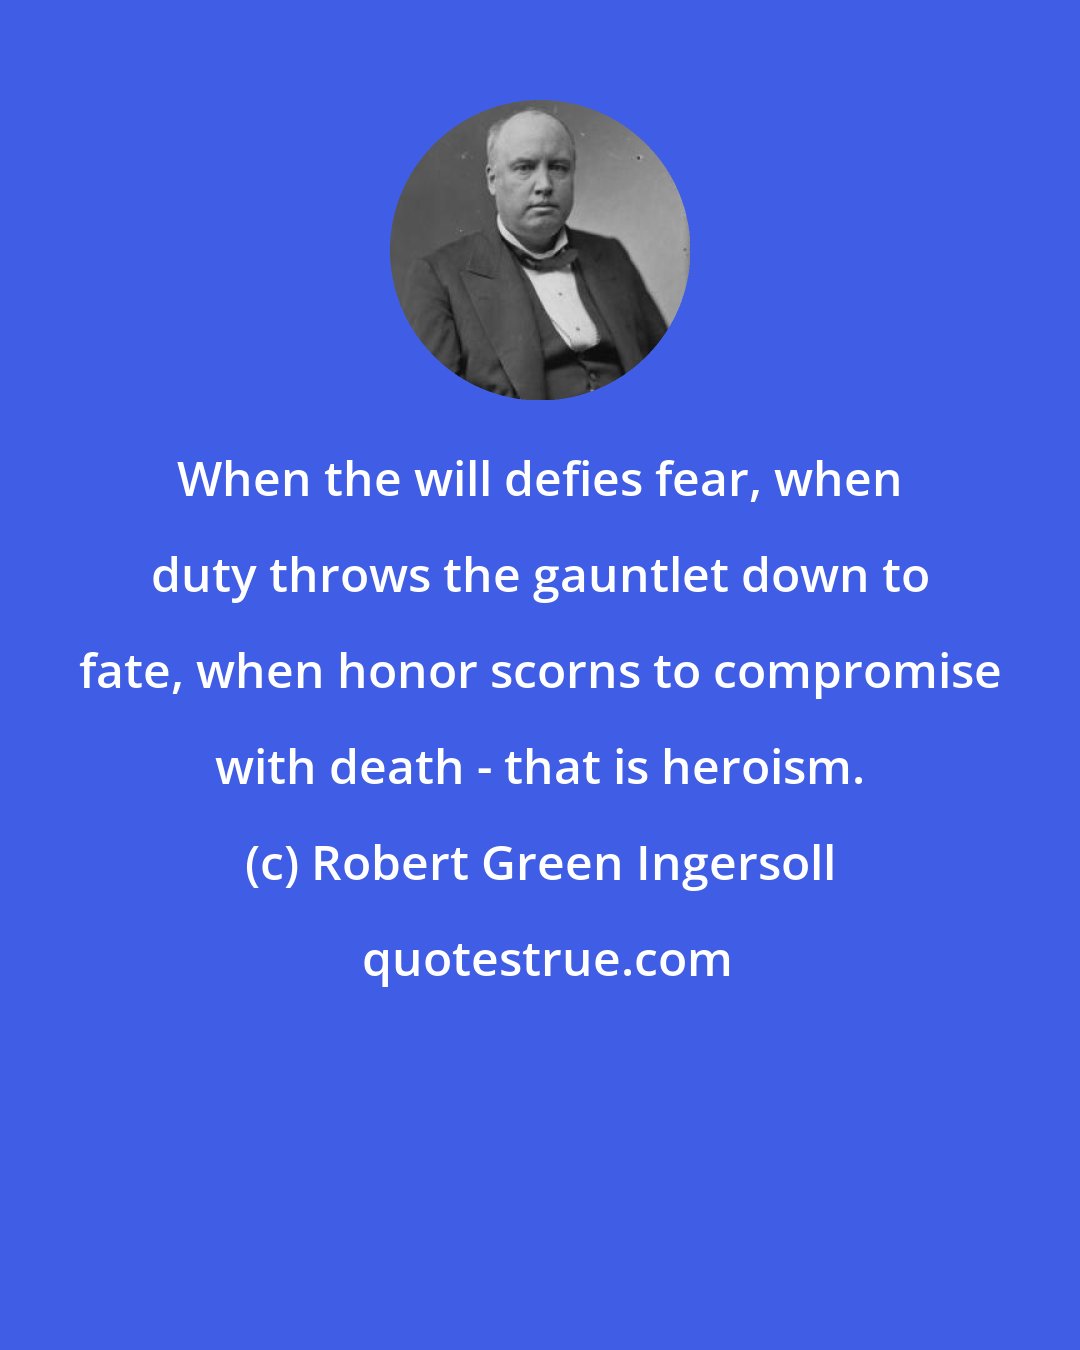 Robert Green Ingersoll: When the will defies fear, when duty throws the gauntlet down to fate, when honor scorns to compromise with death - that is heroism.